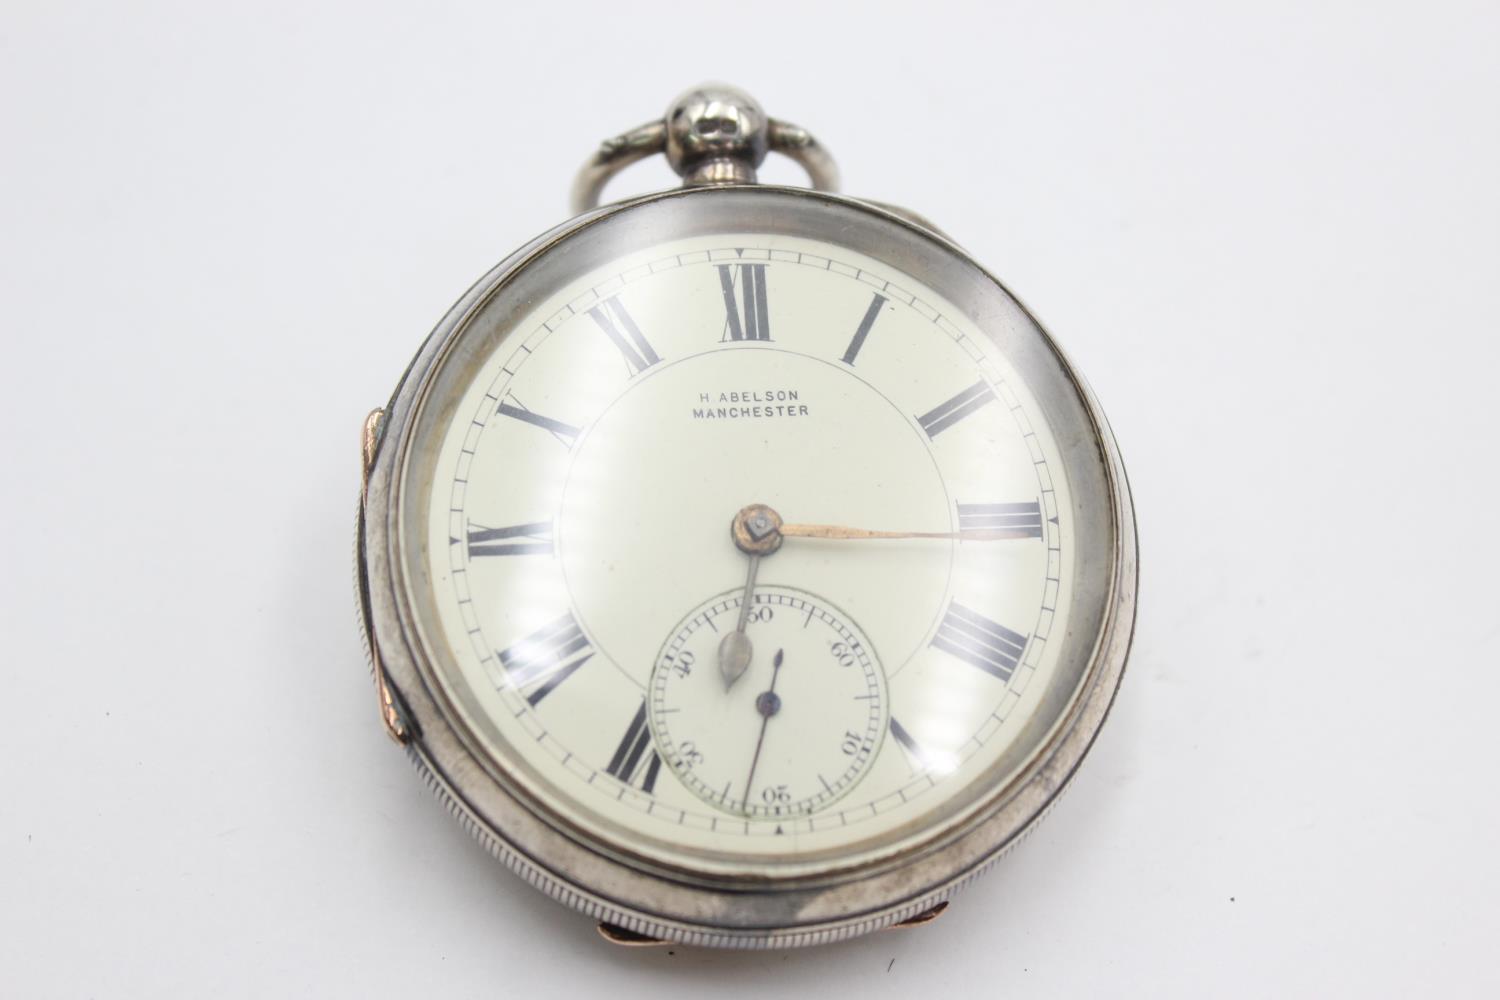 Antique Gents .925 SILVER Open Face Fusee POCKET WATCH Key-Wind WORKING (169g) Antique Gents .925